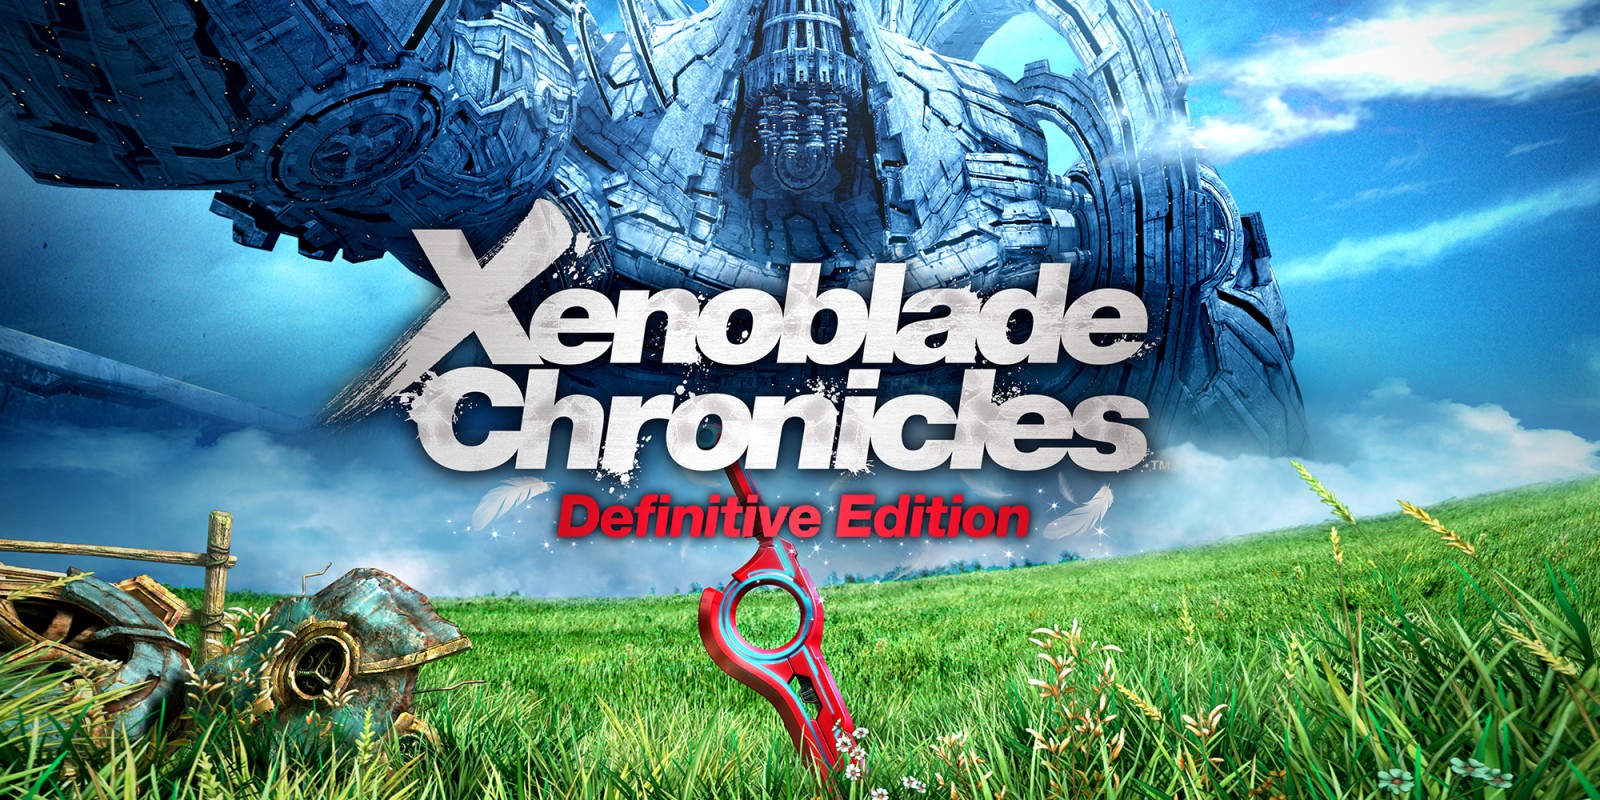 Xenoblade Chronicles Definitive Edition early resolution and frame